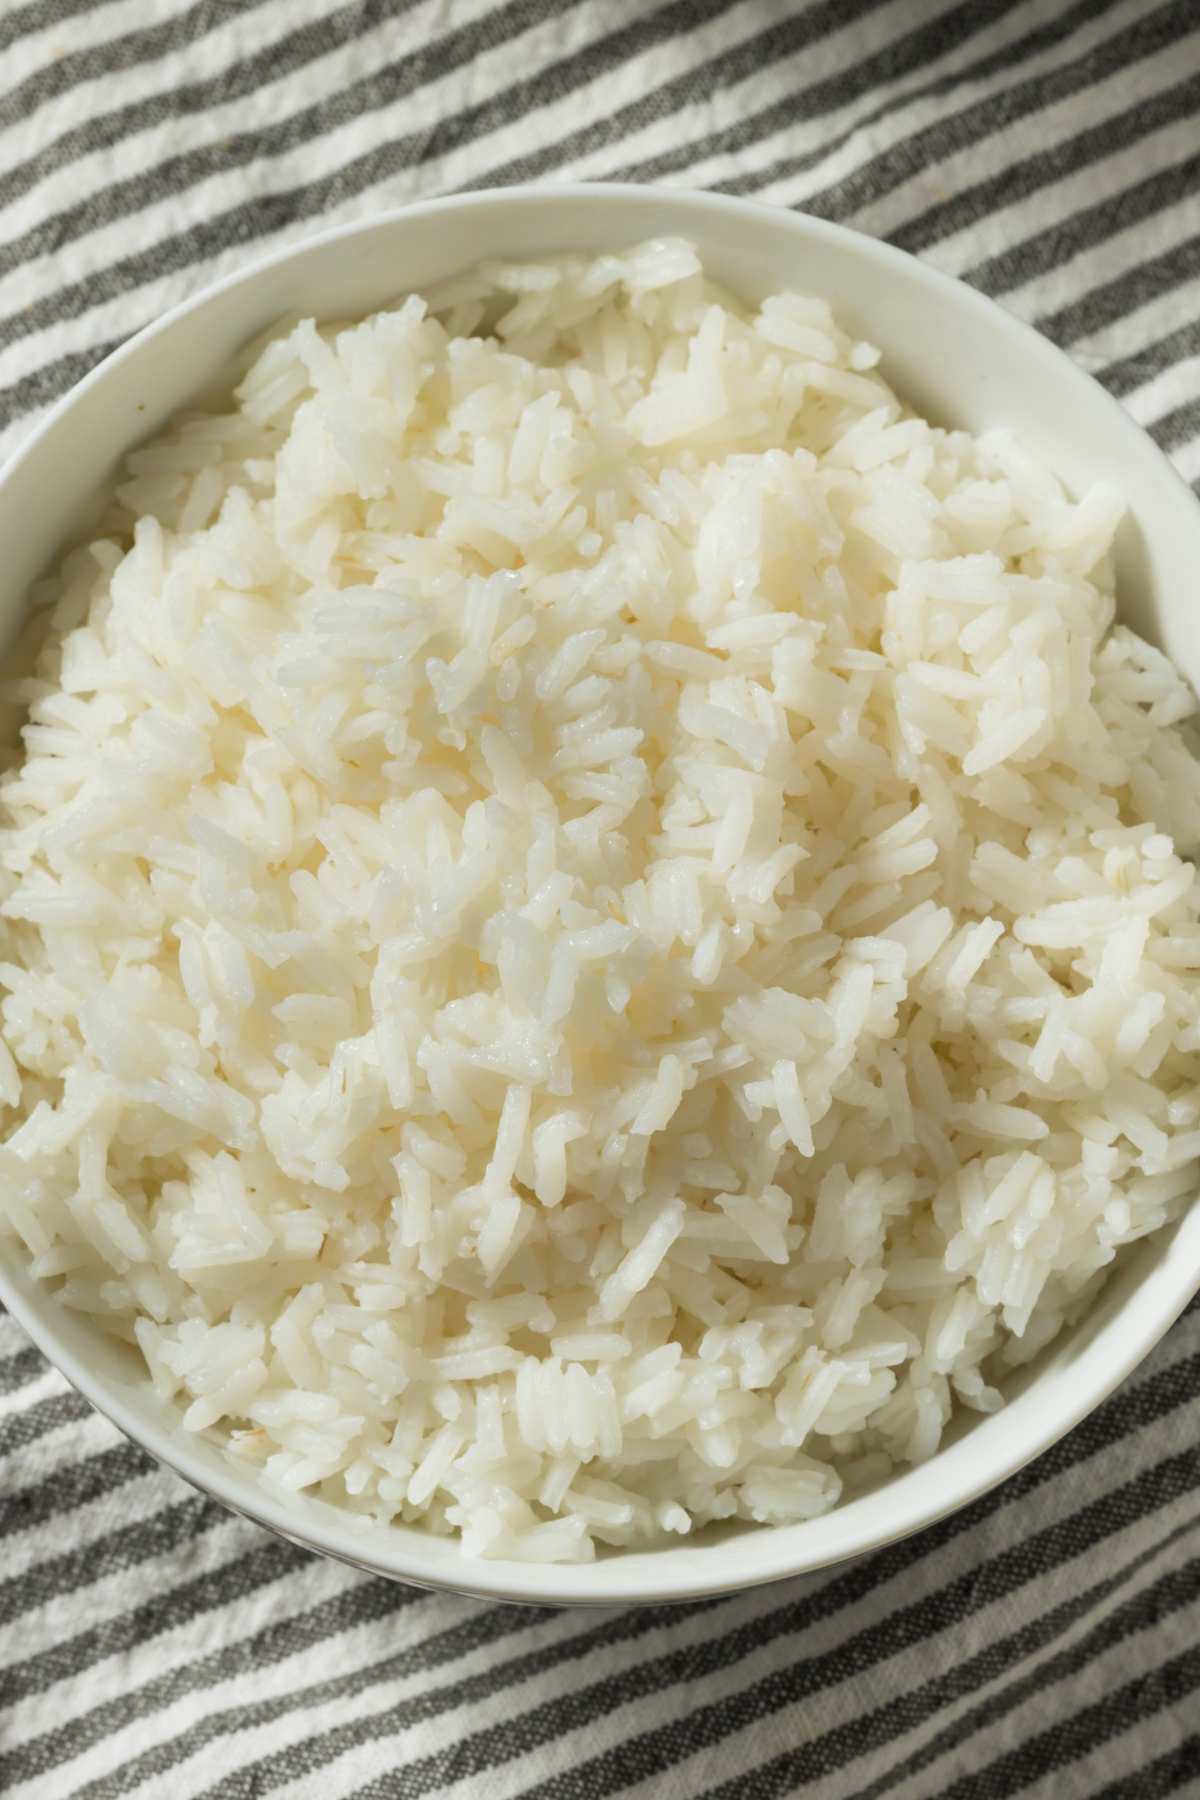 Is white rice keto-friend? How many carbs and net carbs are in white rice? People following the keto diet may wonder if white rice is a suitable food to eat.